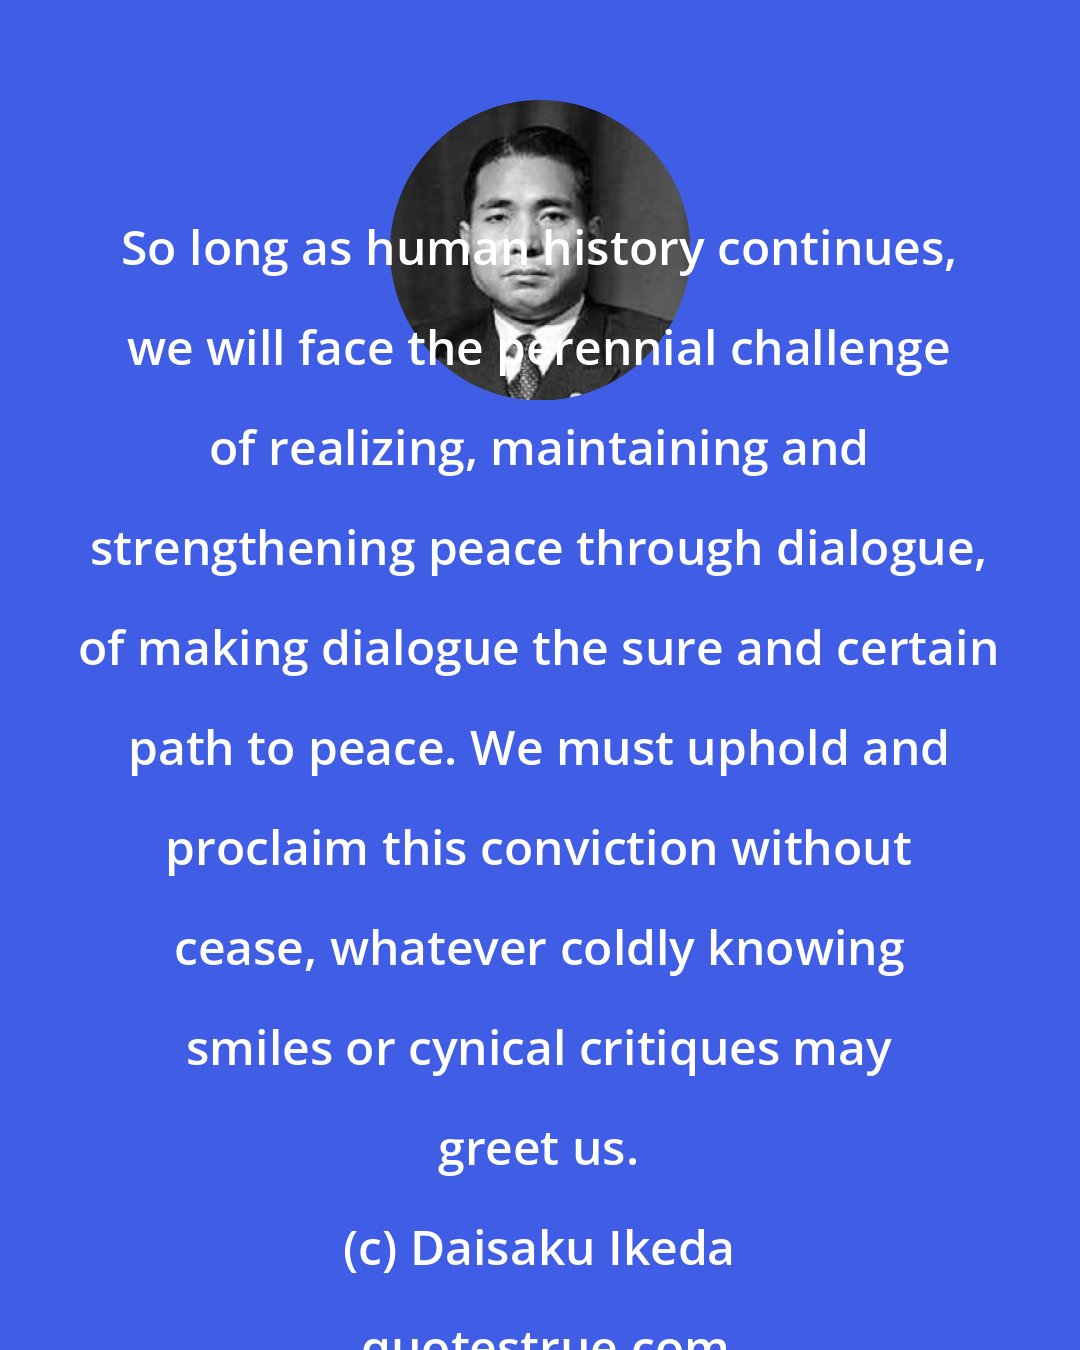 Daisaku Ikeda: So long as human history continues, we will face the perennial challenge of realizing, maintaining and strengthening peace through dialogue, of making dialogue the sure and certain path to peace. We must uphold and proclaim this conviction without cease, whatever coldly knowing smiles or cynical critiques may greet us.